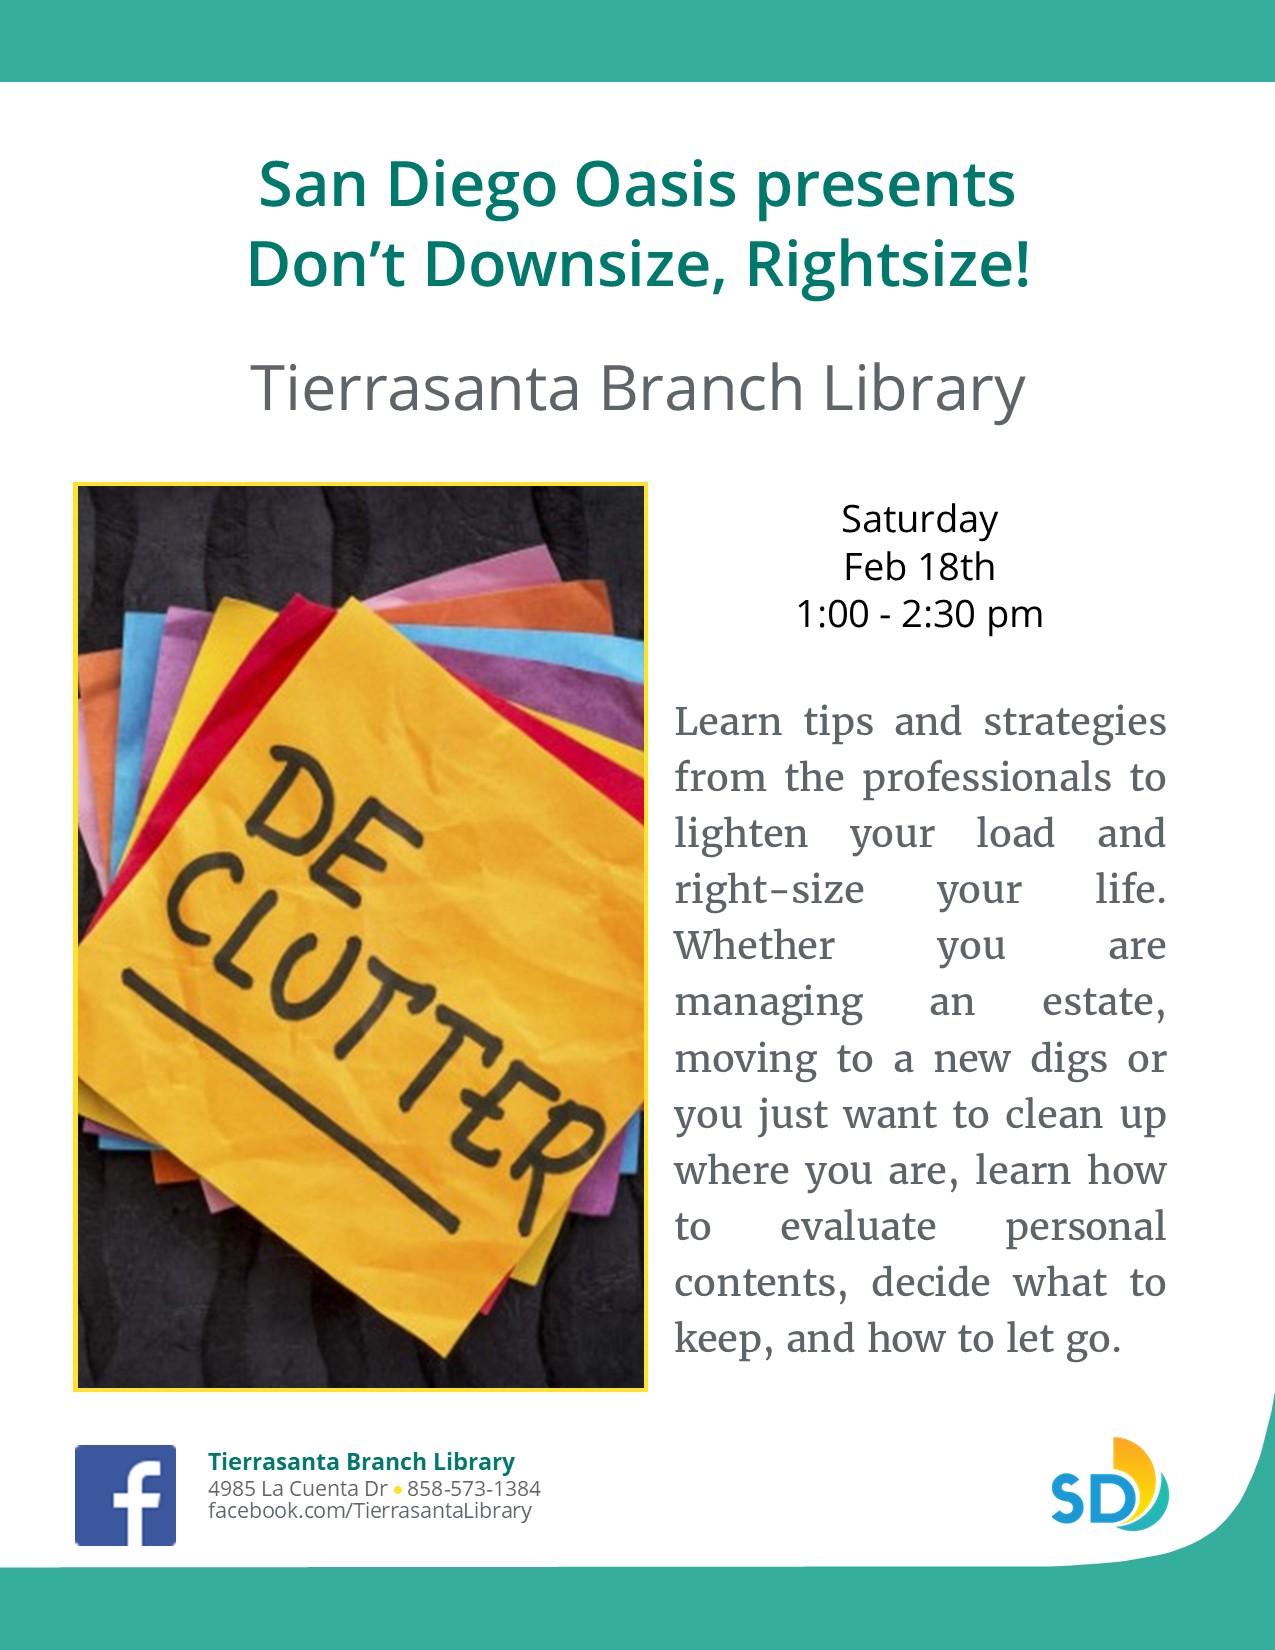 Flyer with image of post-it notes that say "declutter" in all caps on them